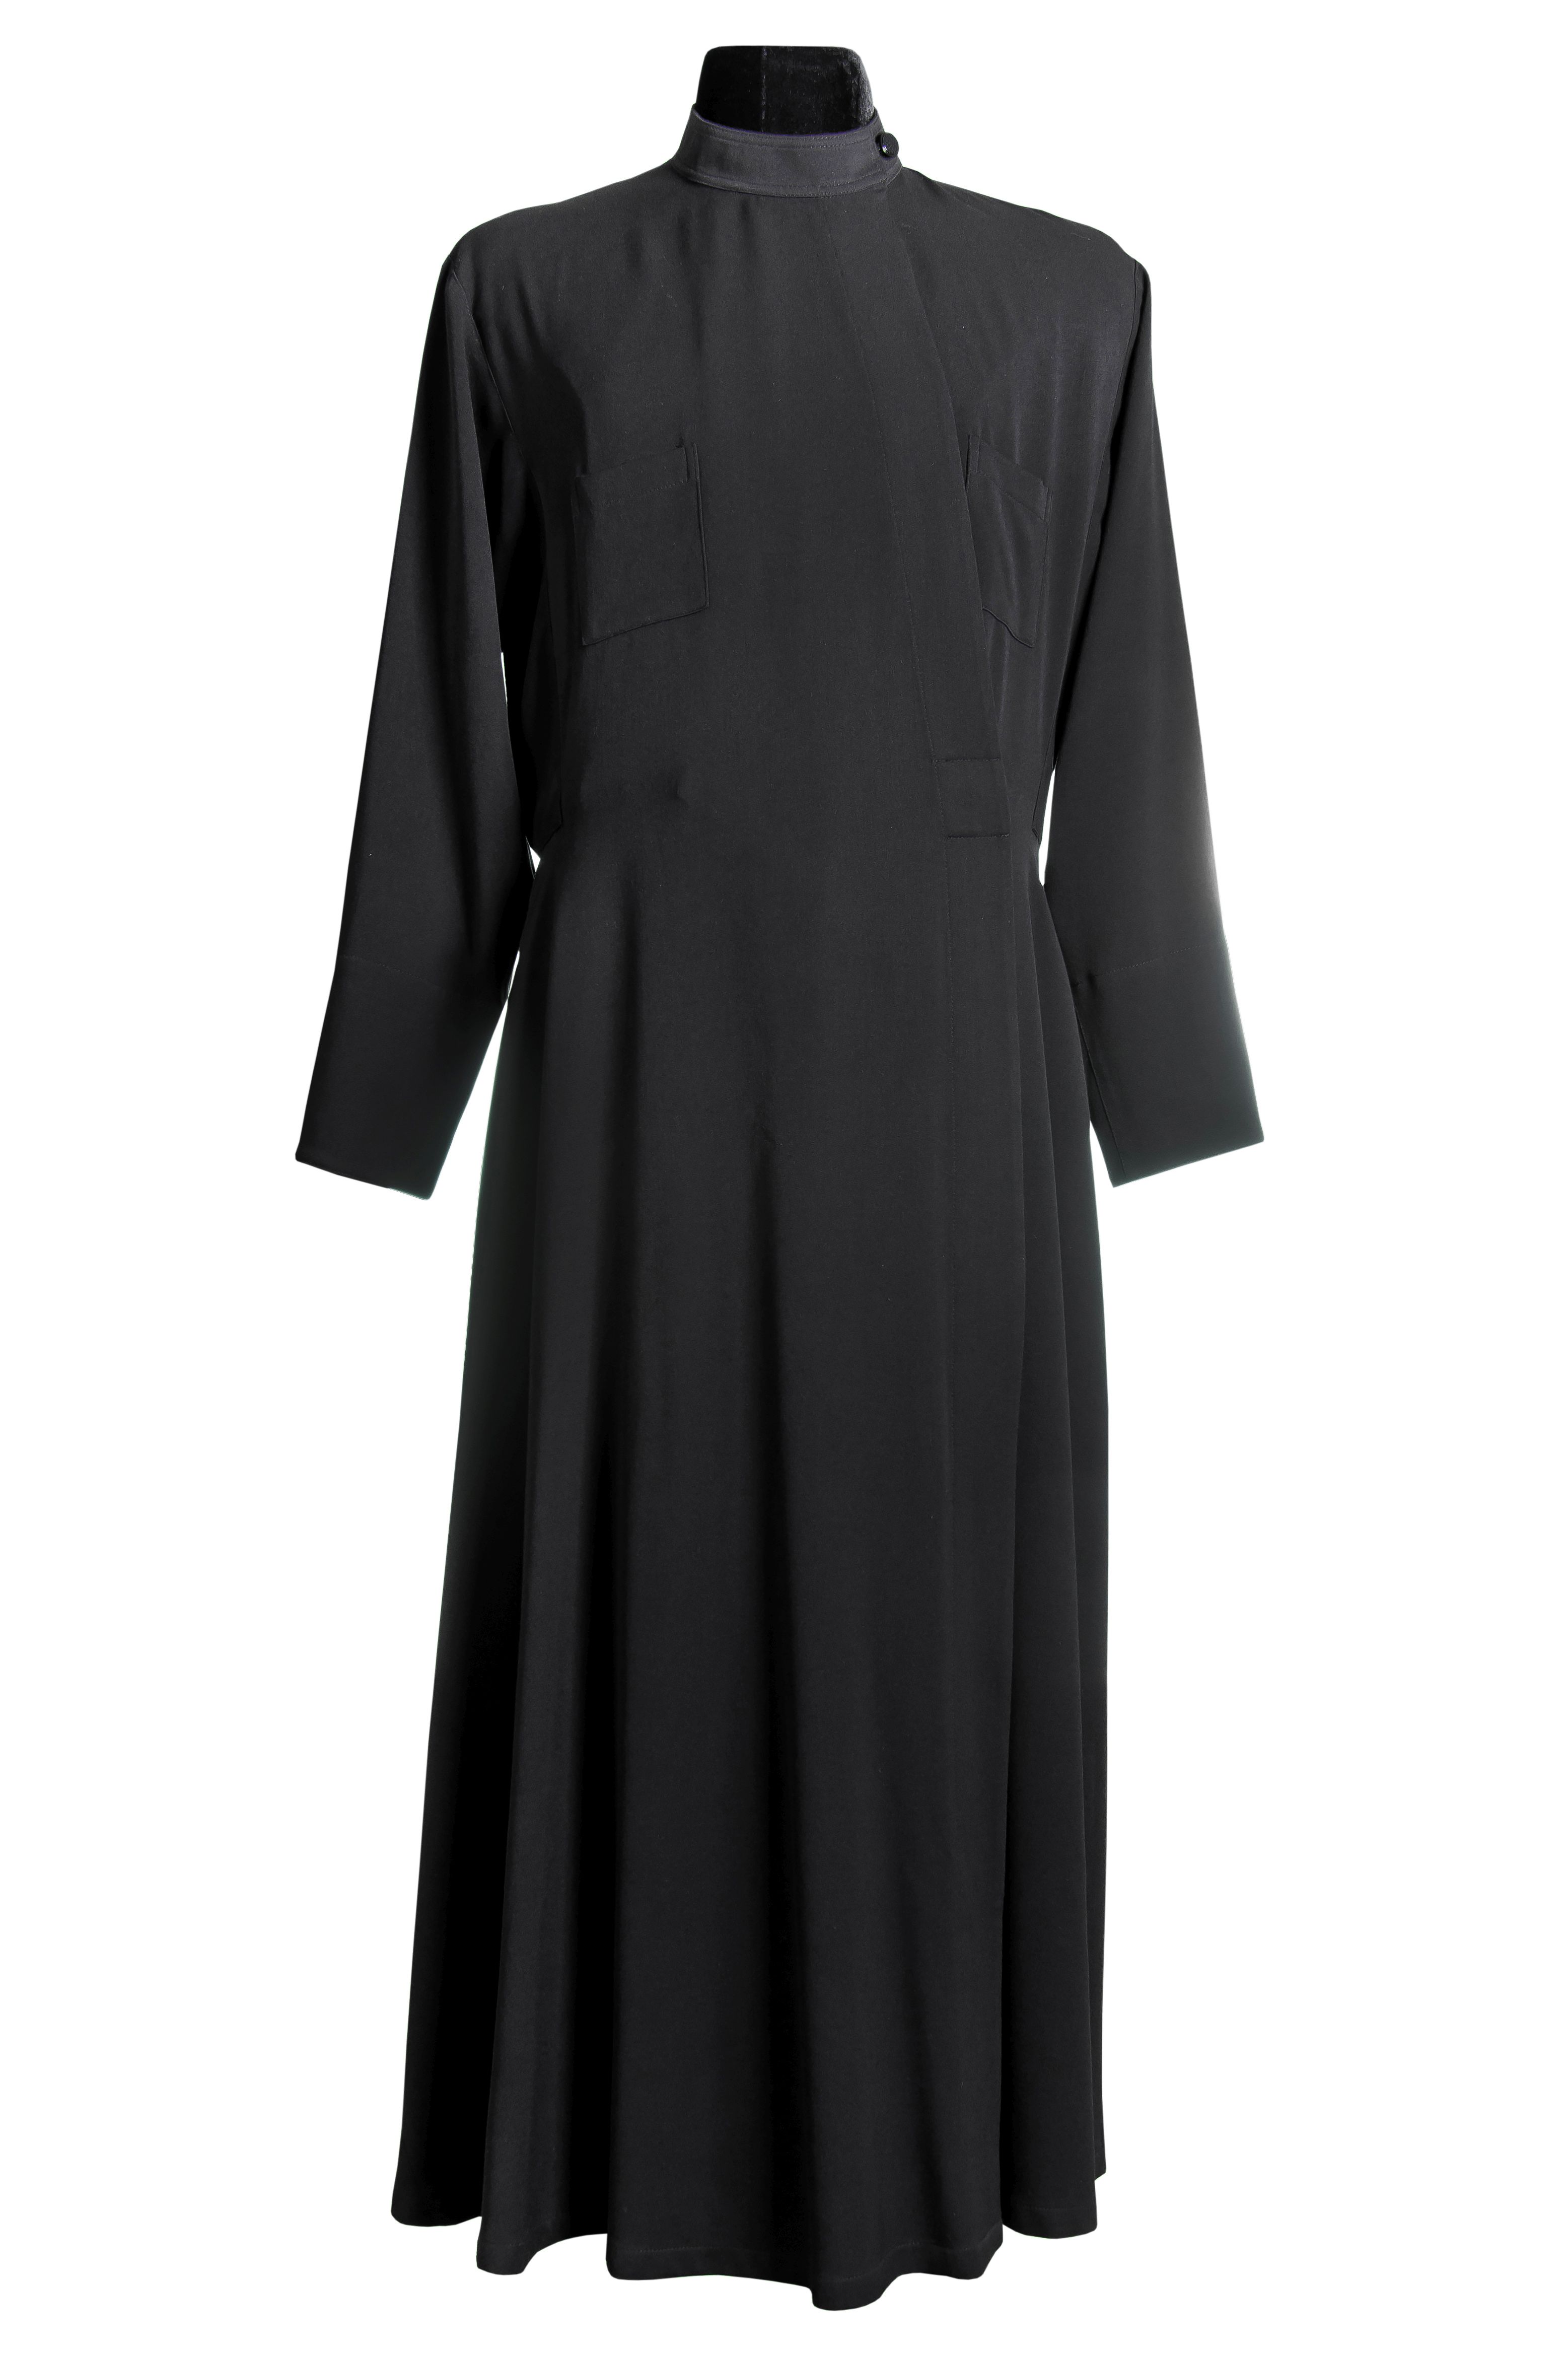 ALTAR SERVER CASSOCK RUSSIAN-STYLE • buy | for sale >>> ORTHODOX